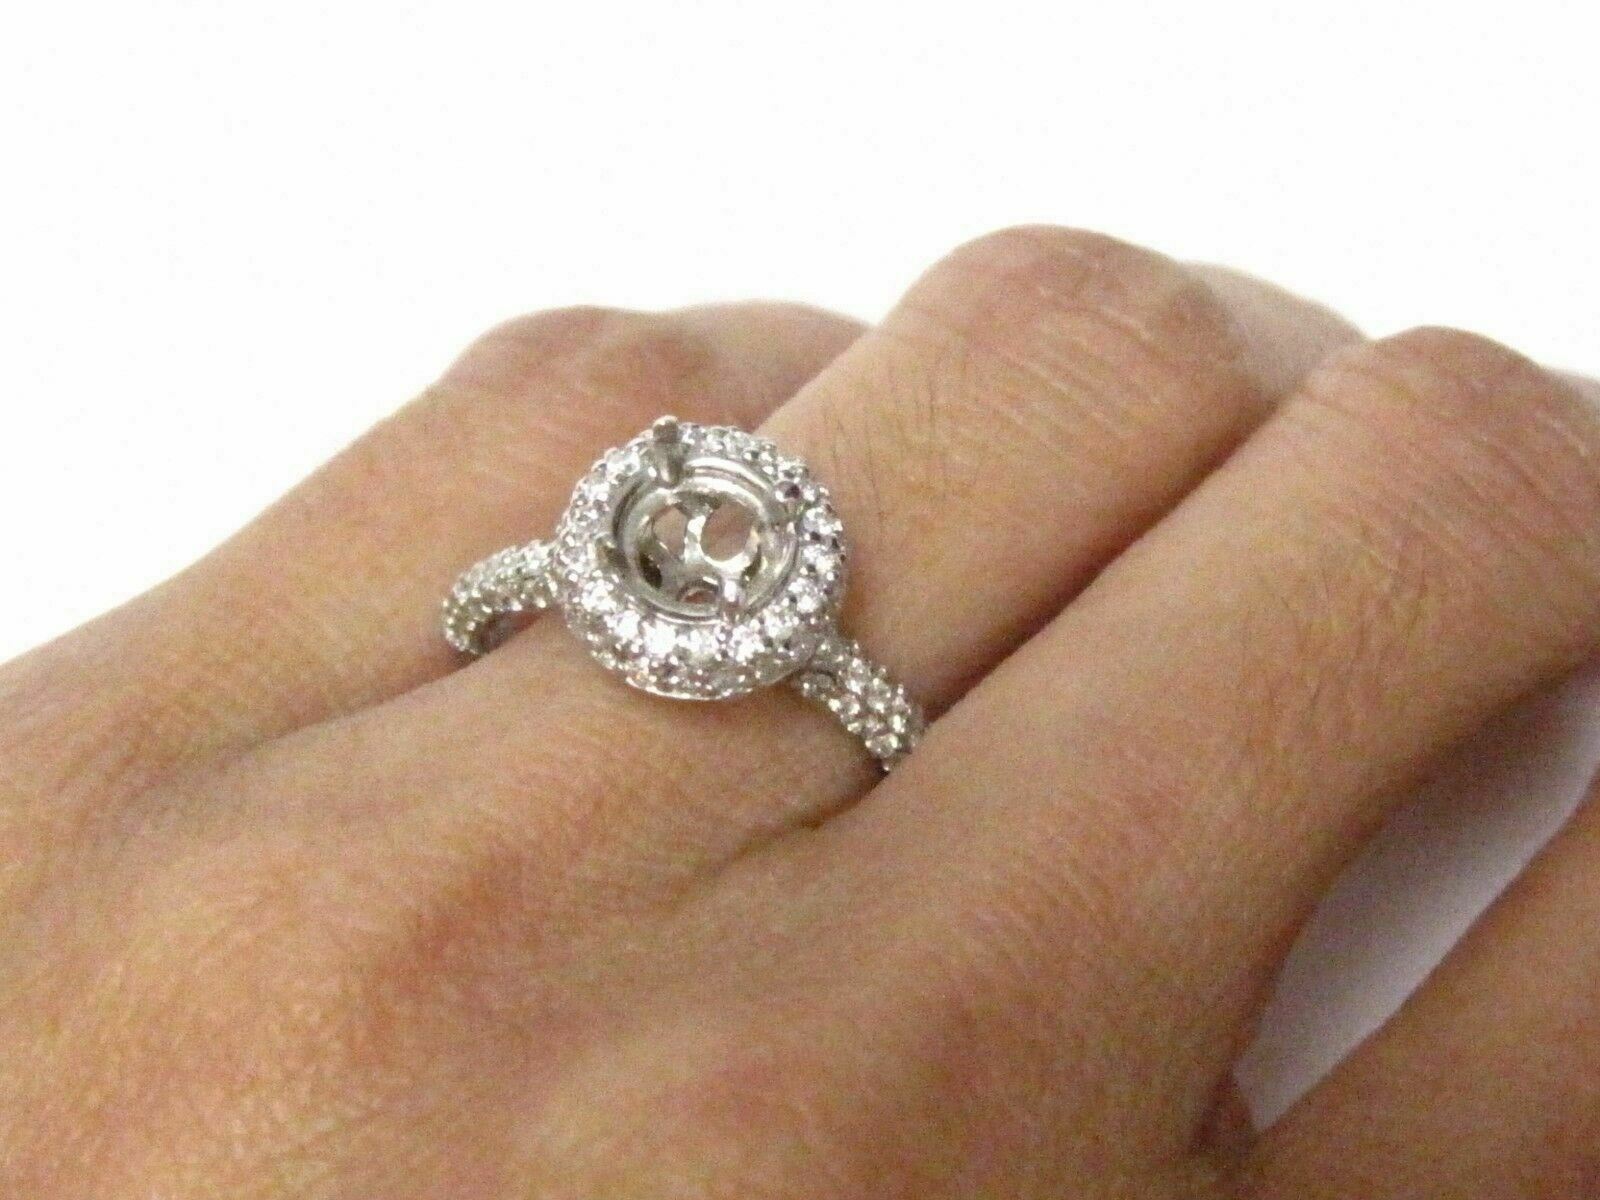 4 Prongs Semi-Mounting for Round Cut Diamond Ring Engagement 14k W/G